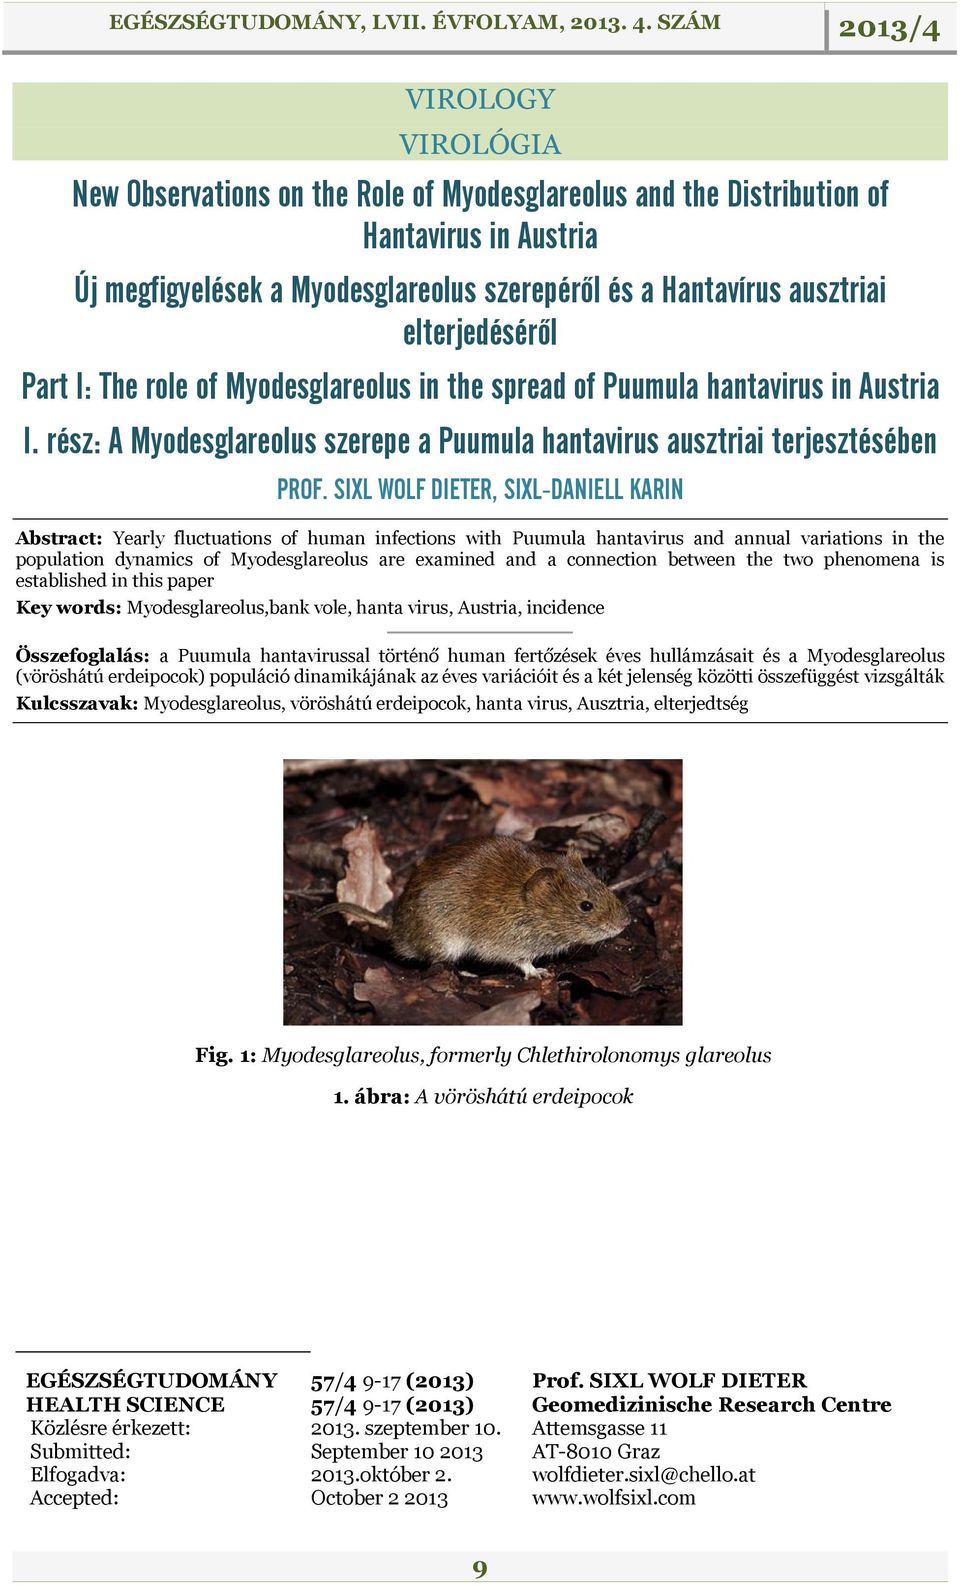 SIXL WOLF DIETER, SIXL-DANIELL KARIN Abstract: Yearly fluctuations of human infections with Puumula hantavirus and annual variations in the population dynamics of Myodesglareolus are examined and a